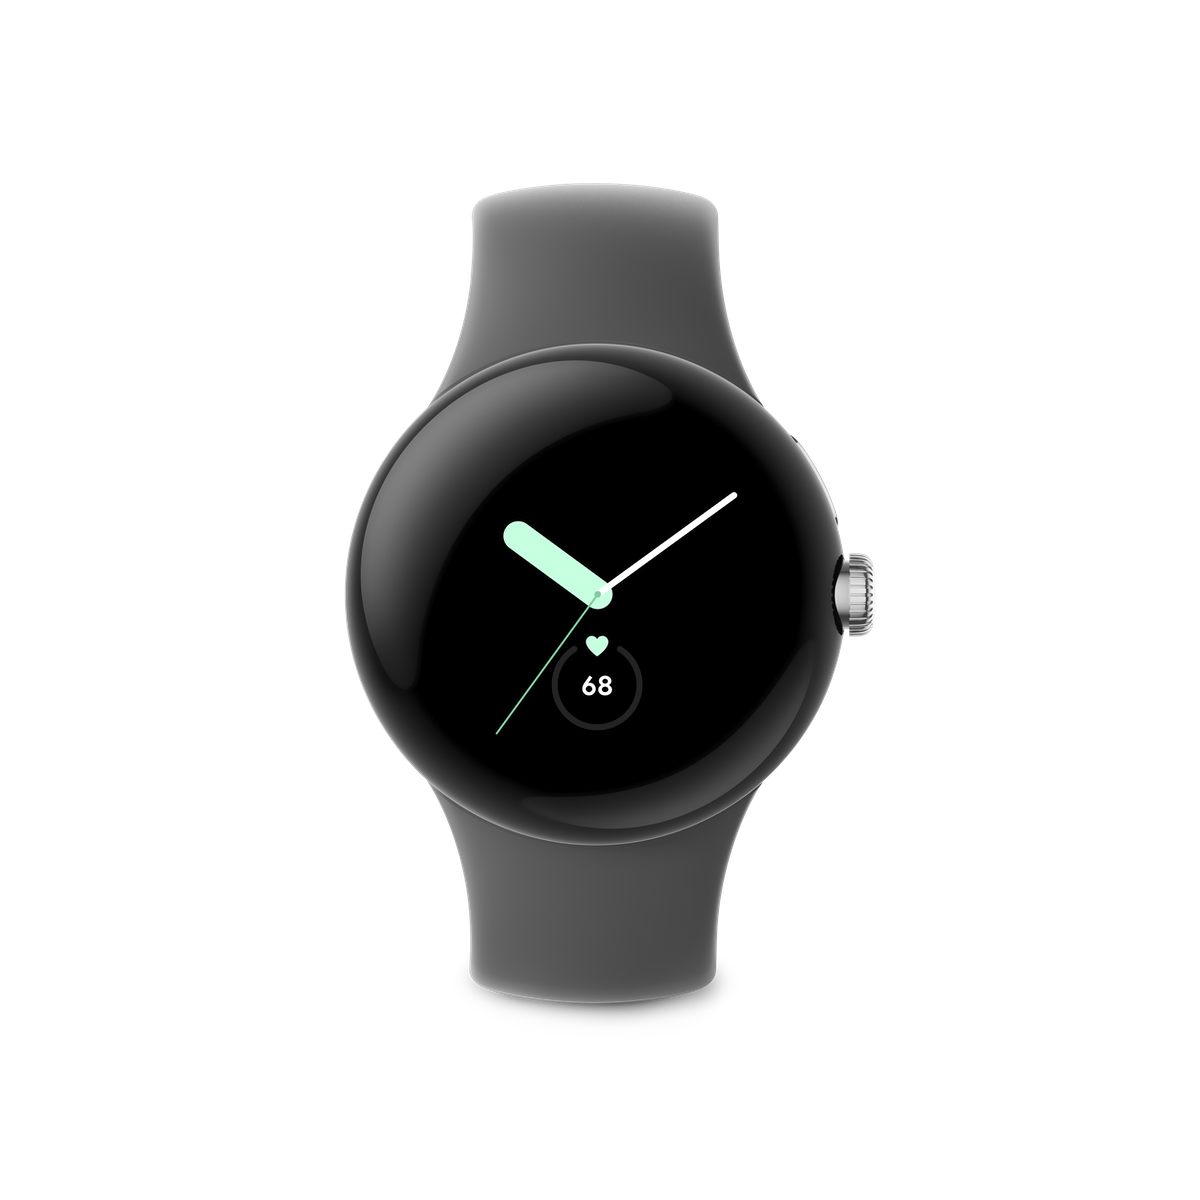 Pixel Watch: the first smart watch from Google